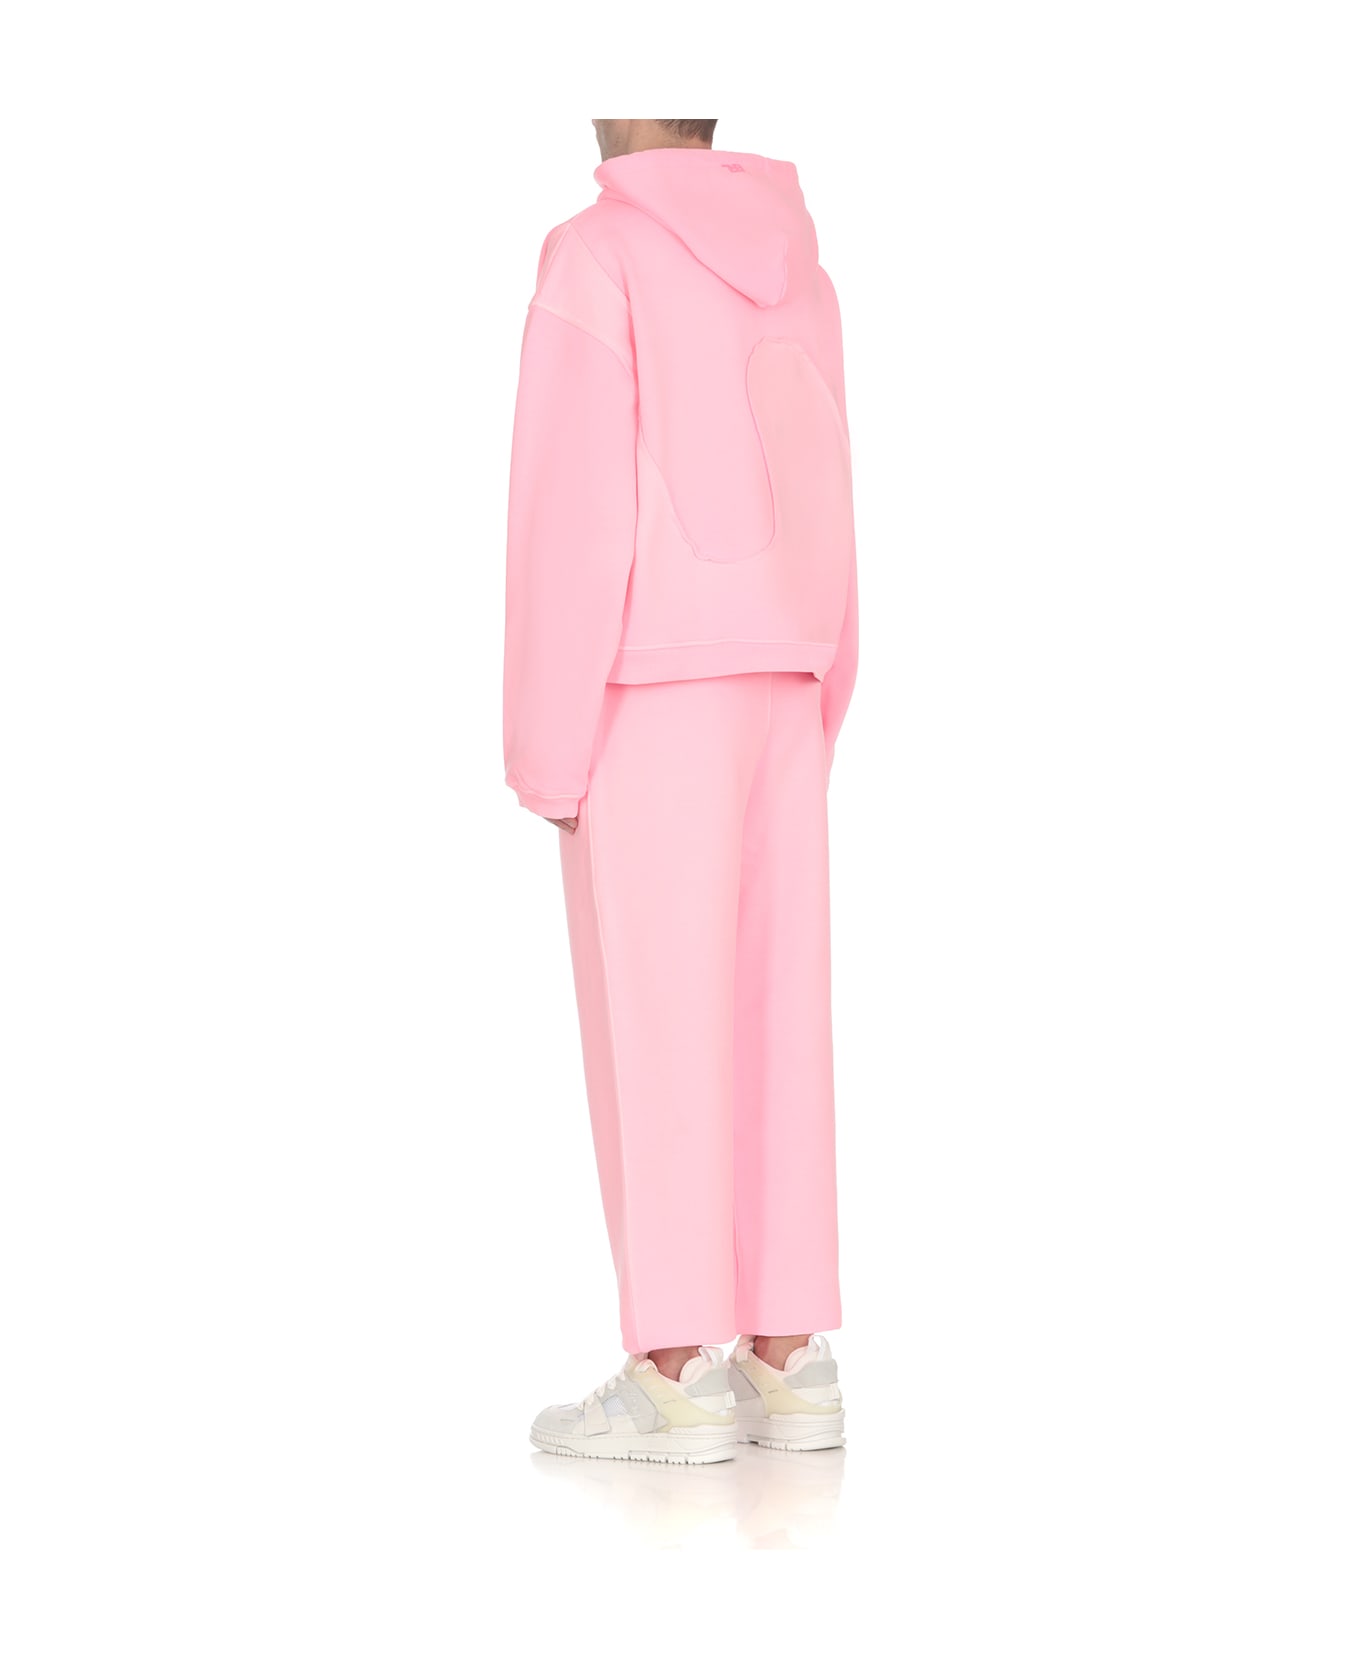 ERL Cotton Hoodie - Pink